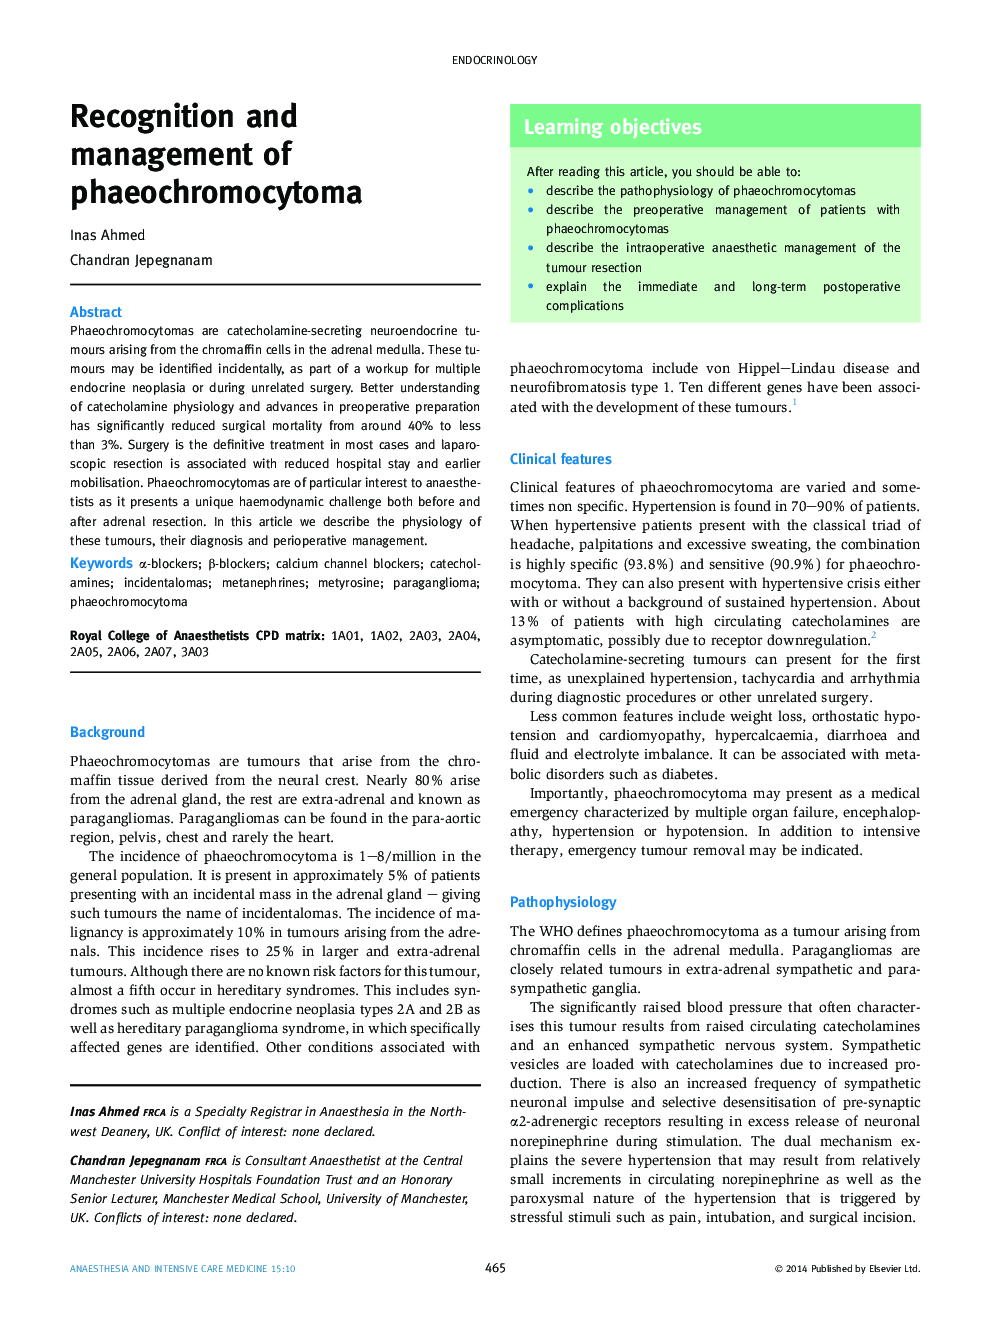 Recognition and management of phaeochromocytoma